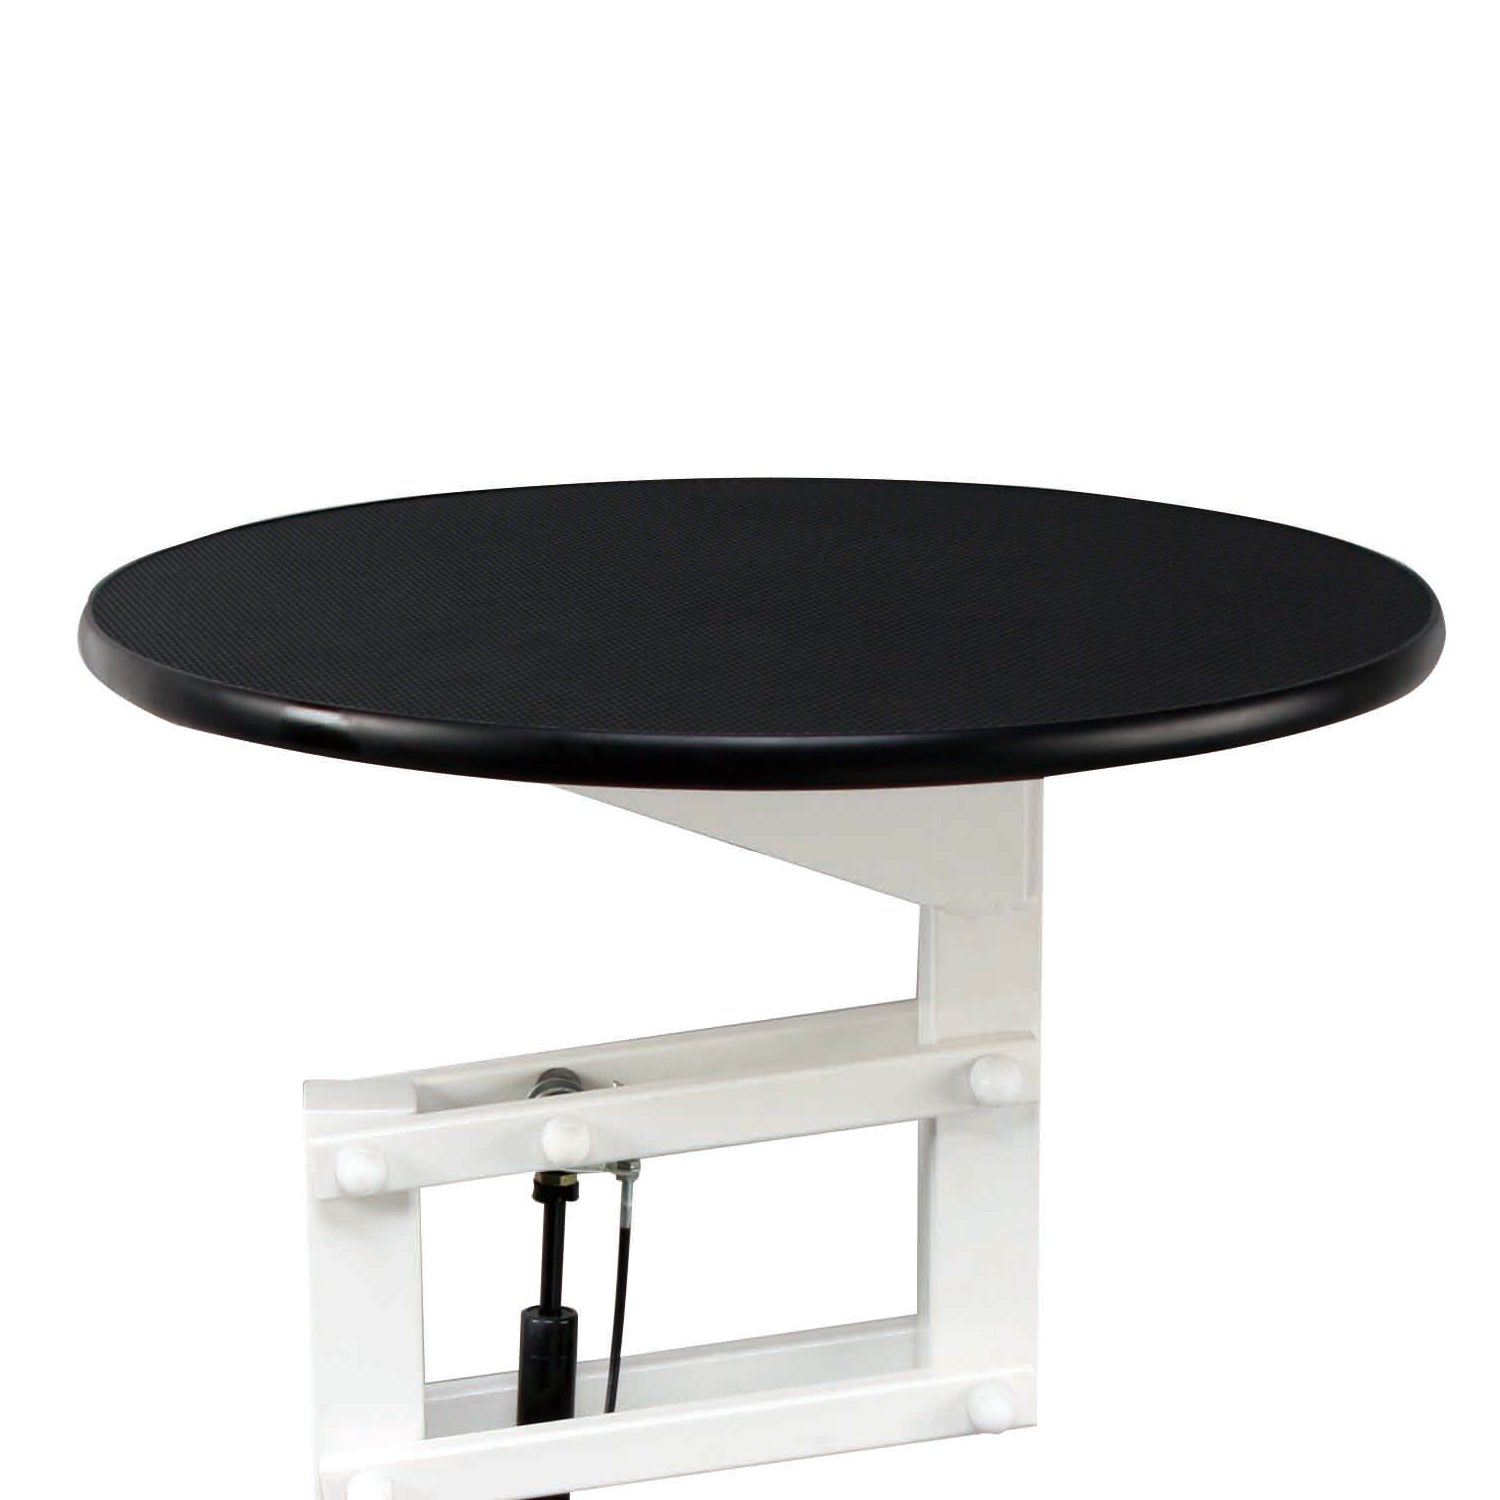 Aeolus Air Spring Table with Rotational Top